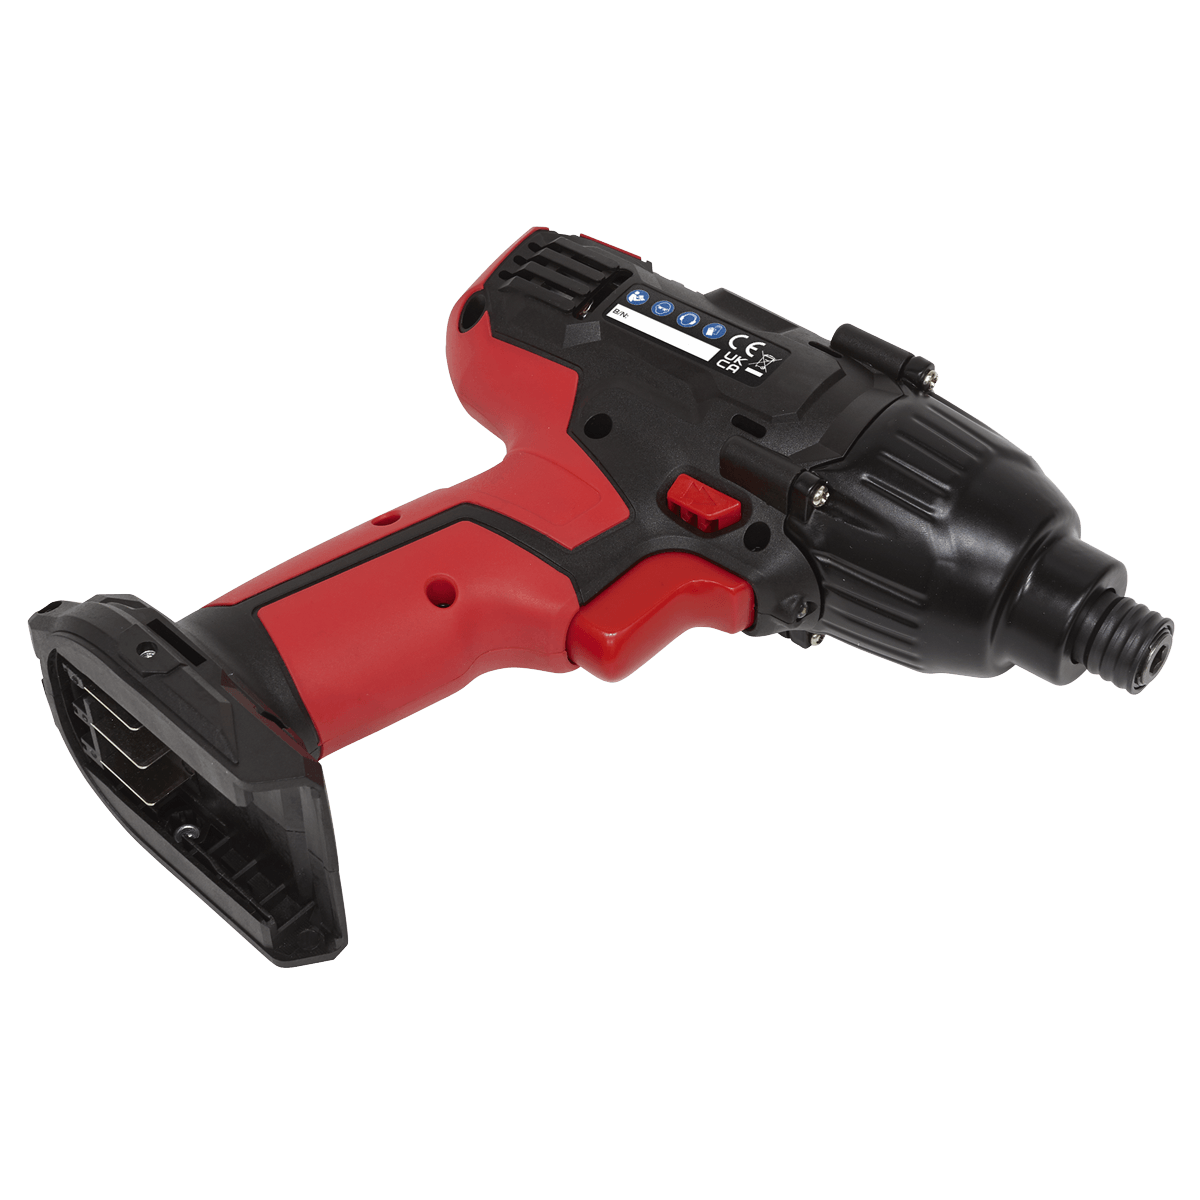 Sealey Impact Driver 20V SV20 Series 1/4"Hex Drive - Body Only CP20VID - Tools 2U Direct SW